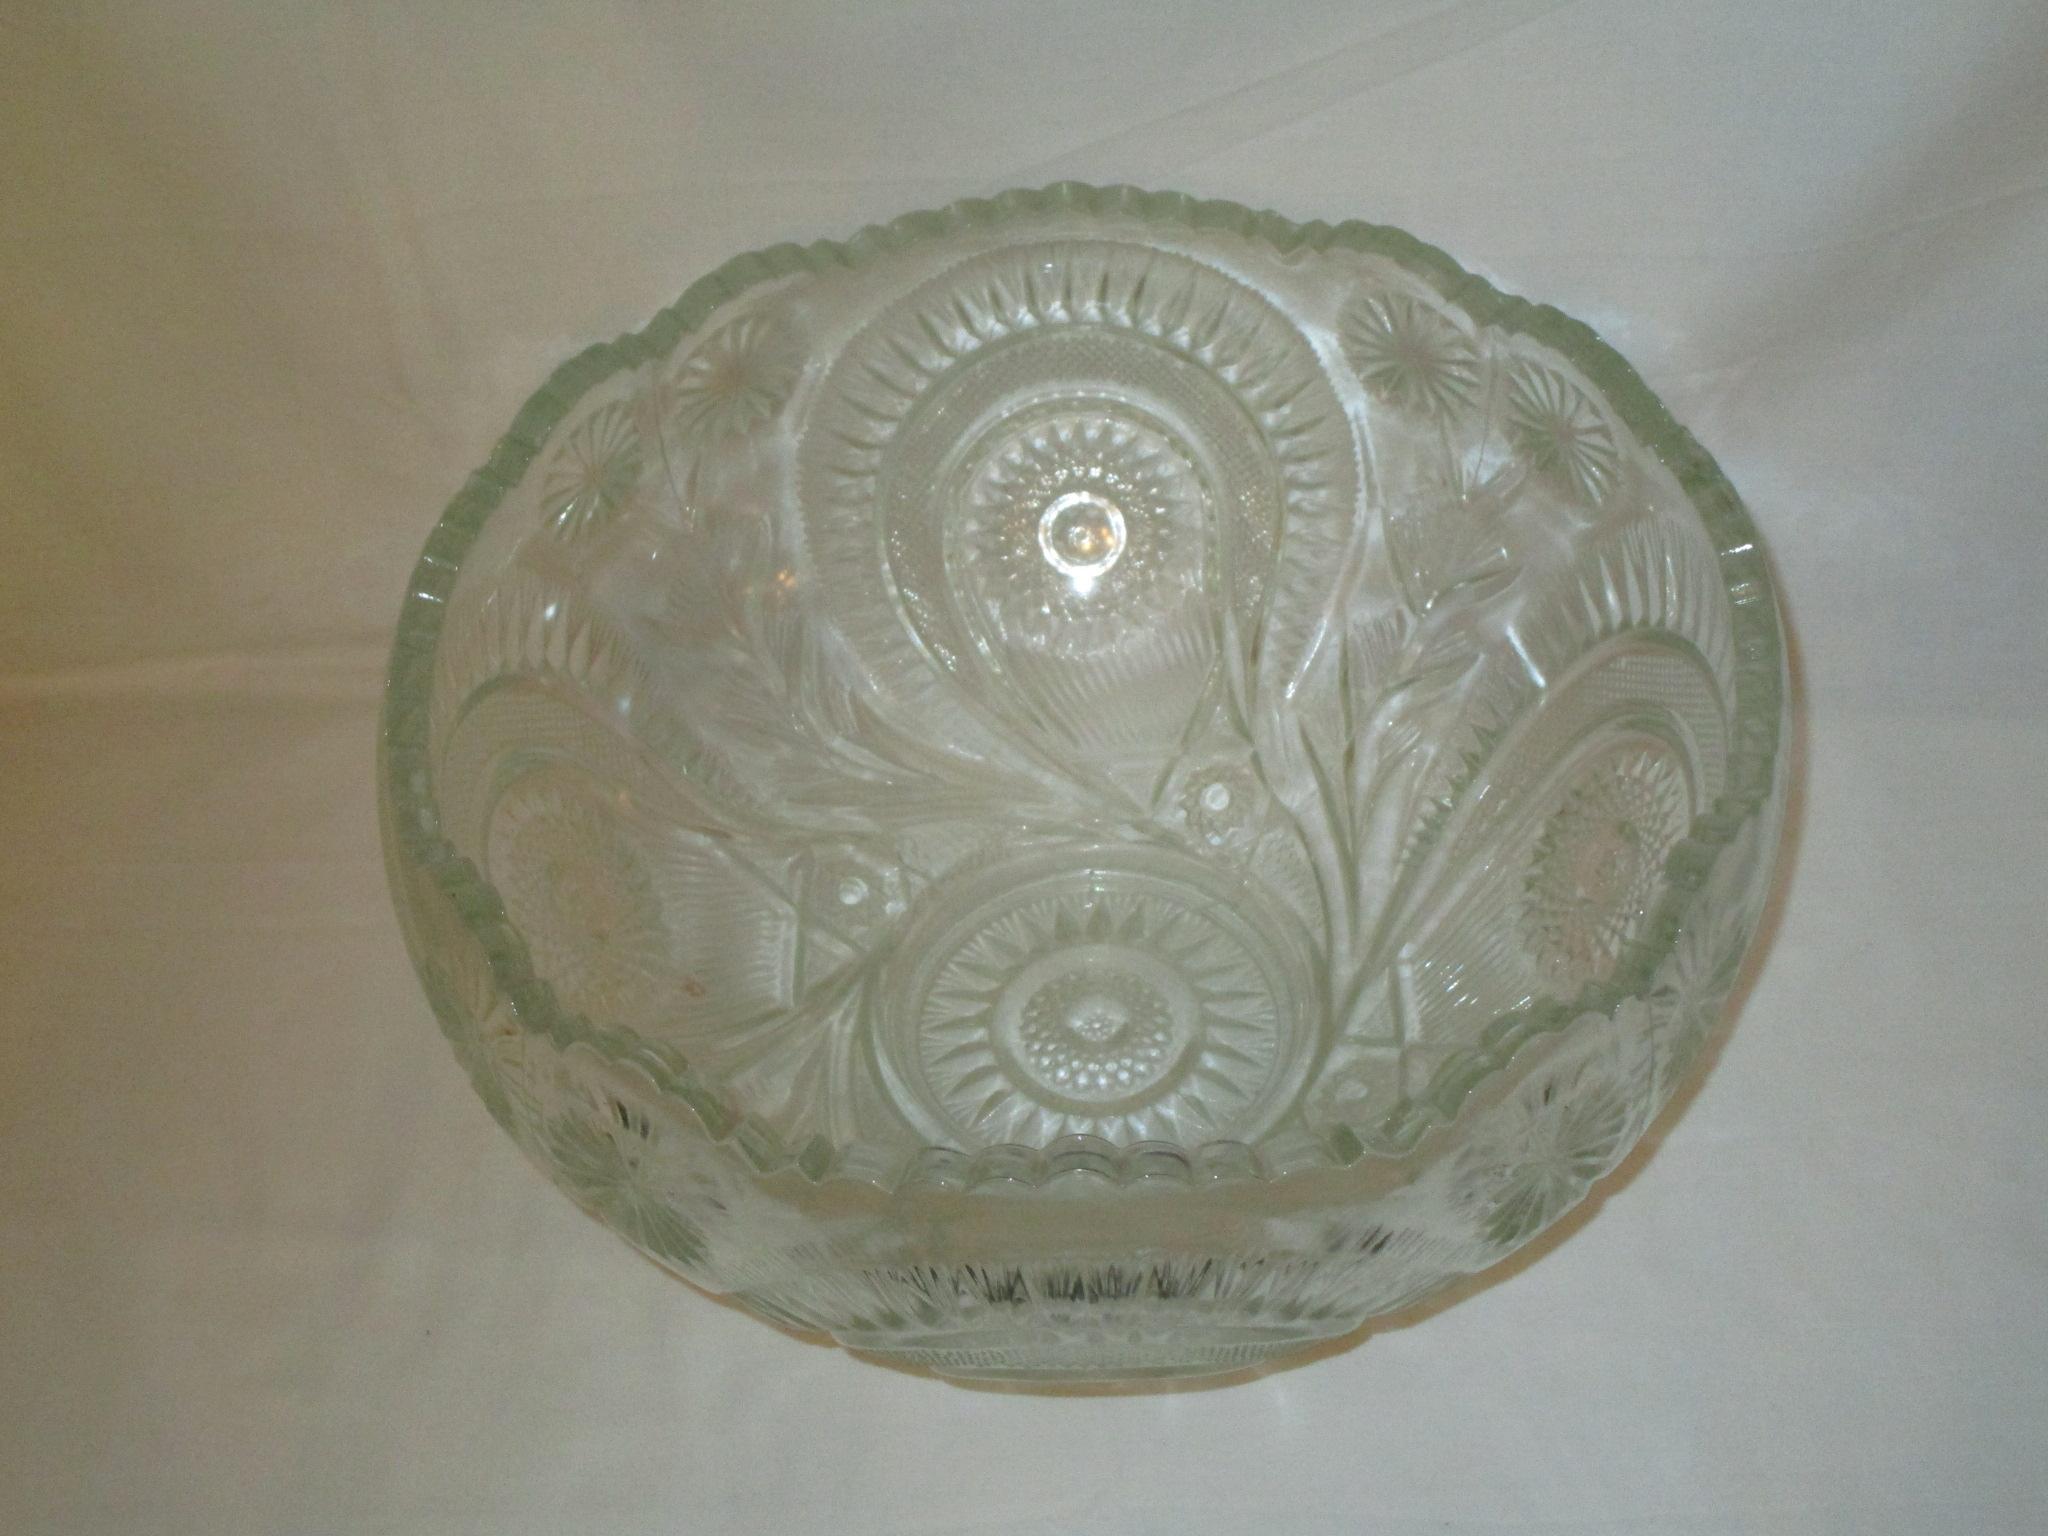 L. E. Smith Early American Pressed Glass Punch Bowl in the Pinwheel & Star Pattern